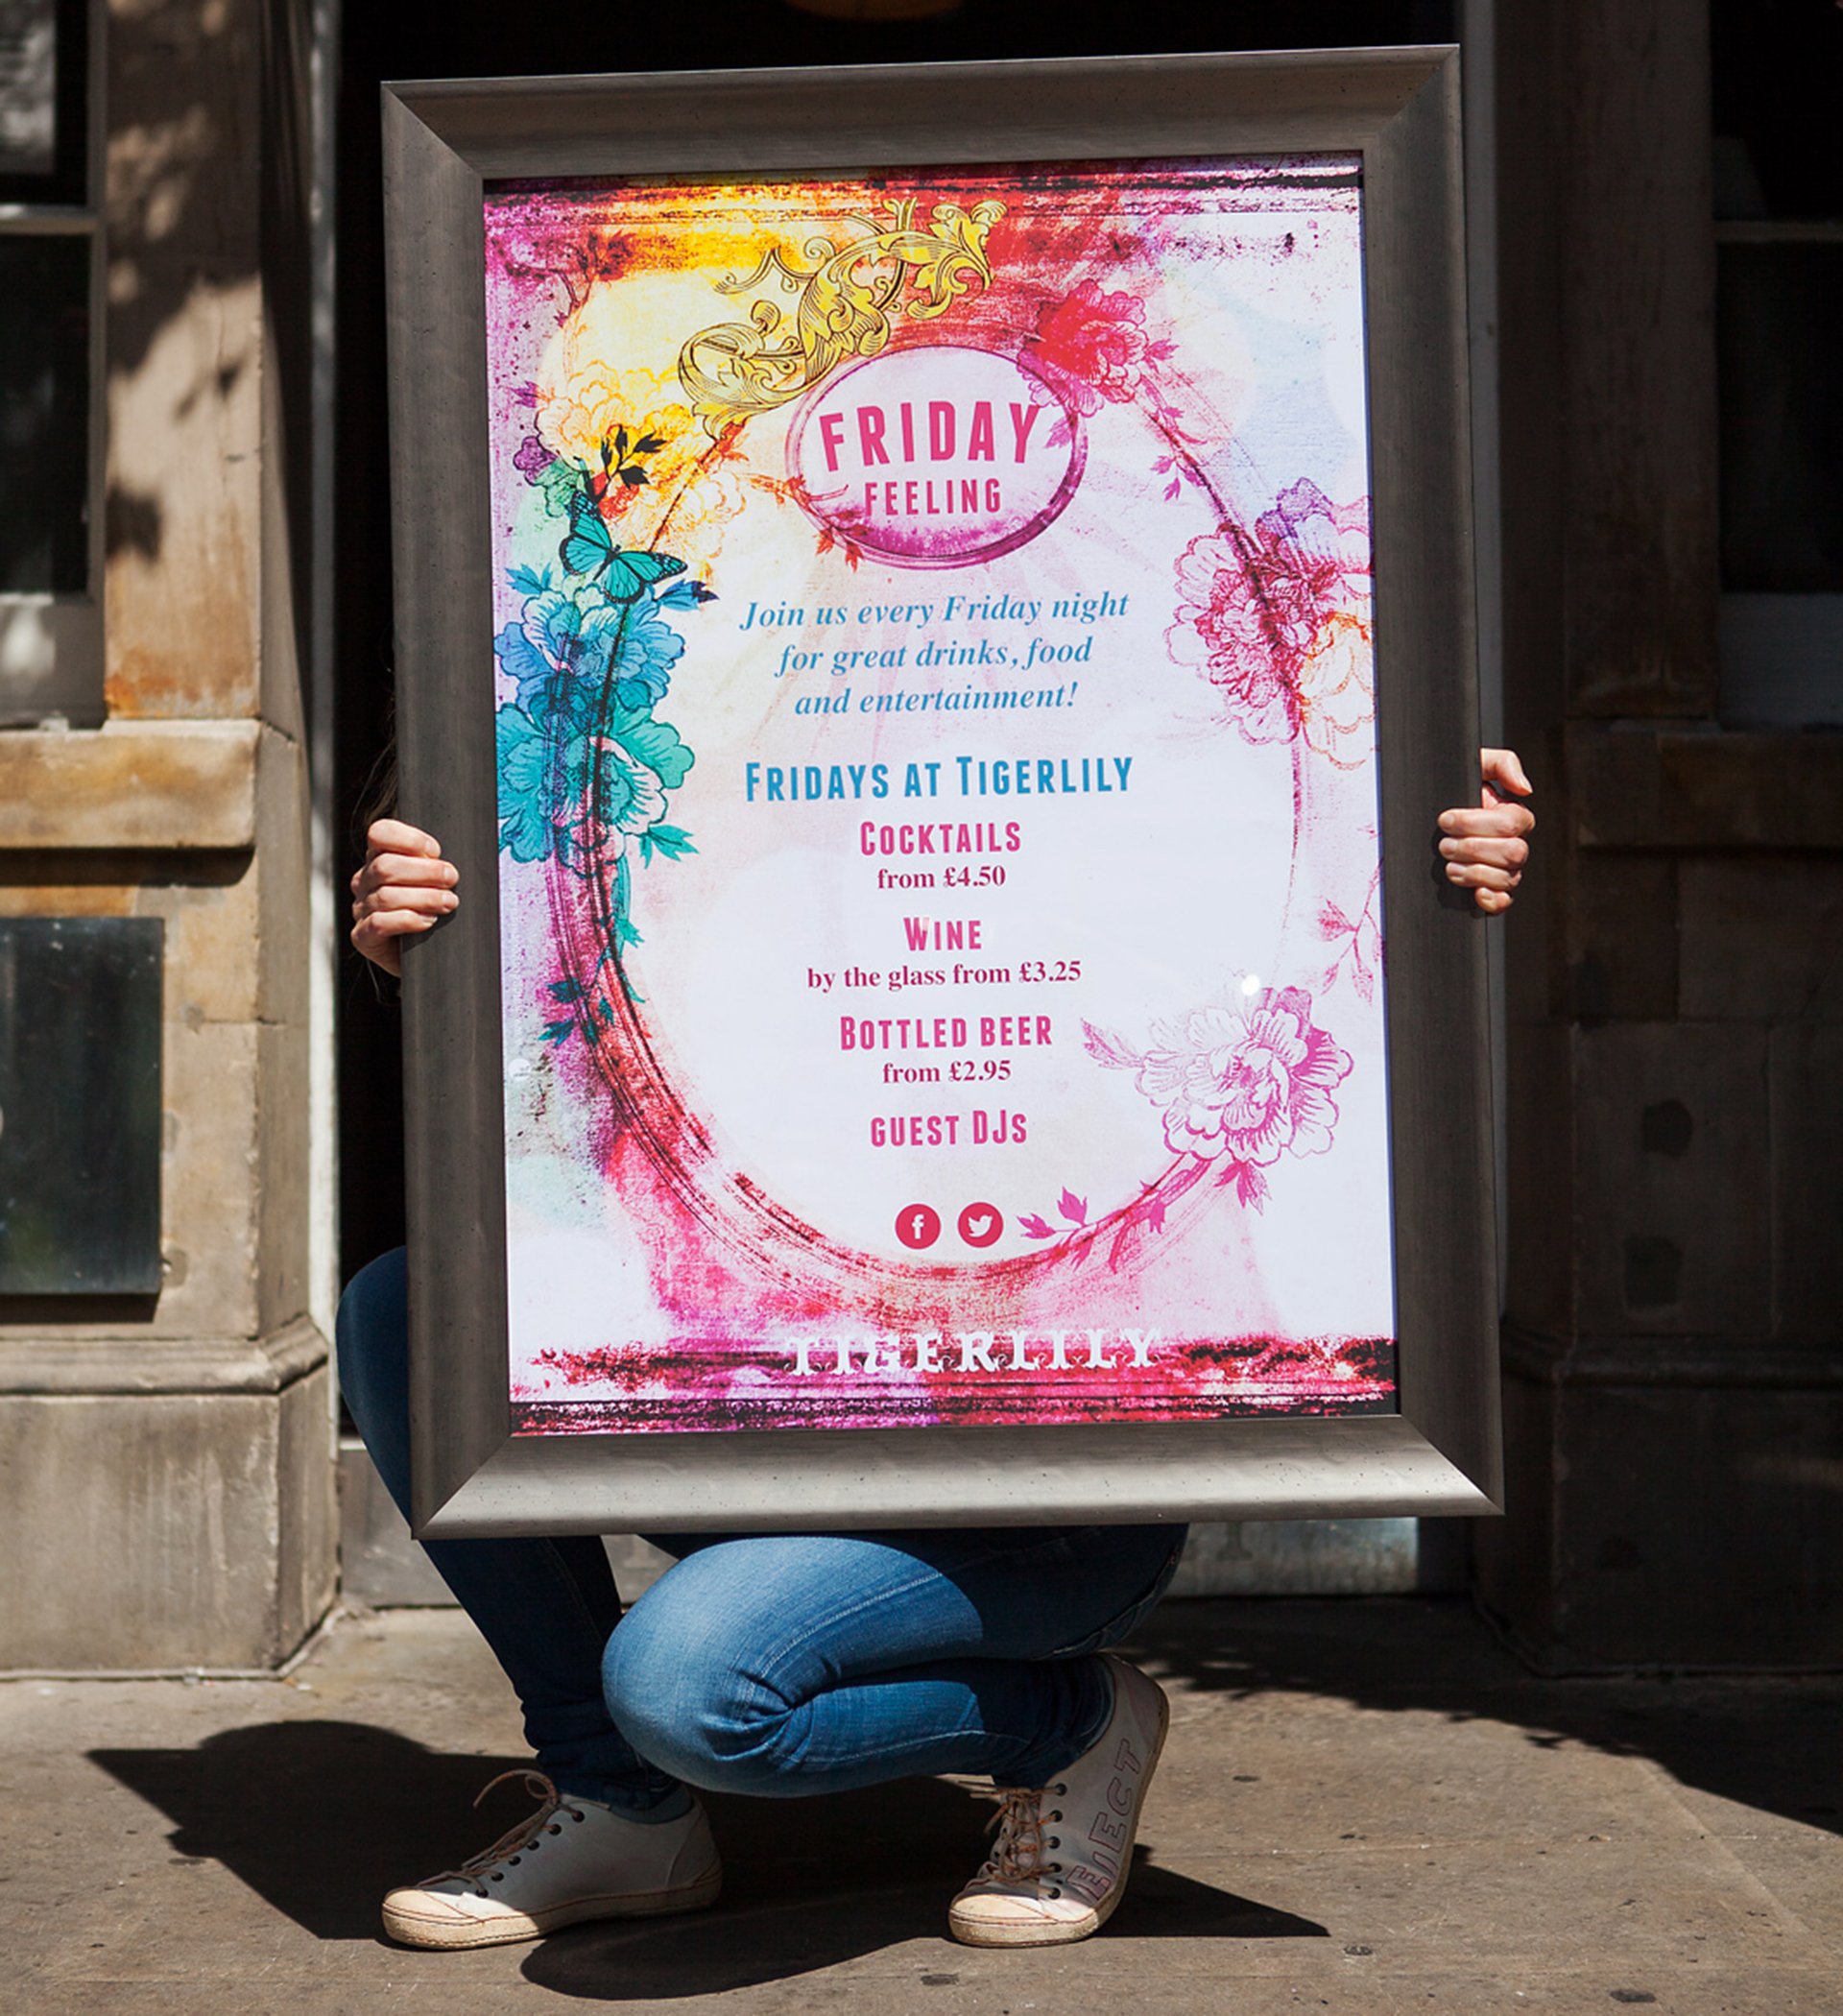 Poster for Tigerlily Edinburgh's 'Friday Feeling' showing cocktail offers and drinks deals